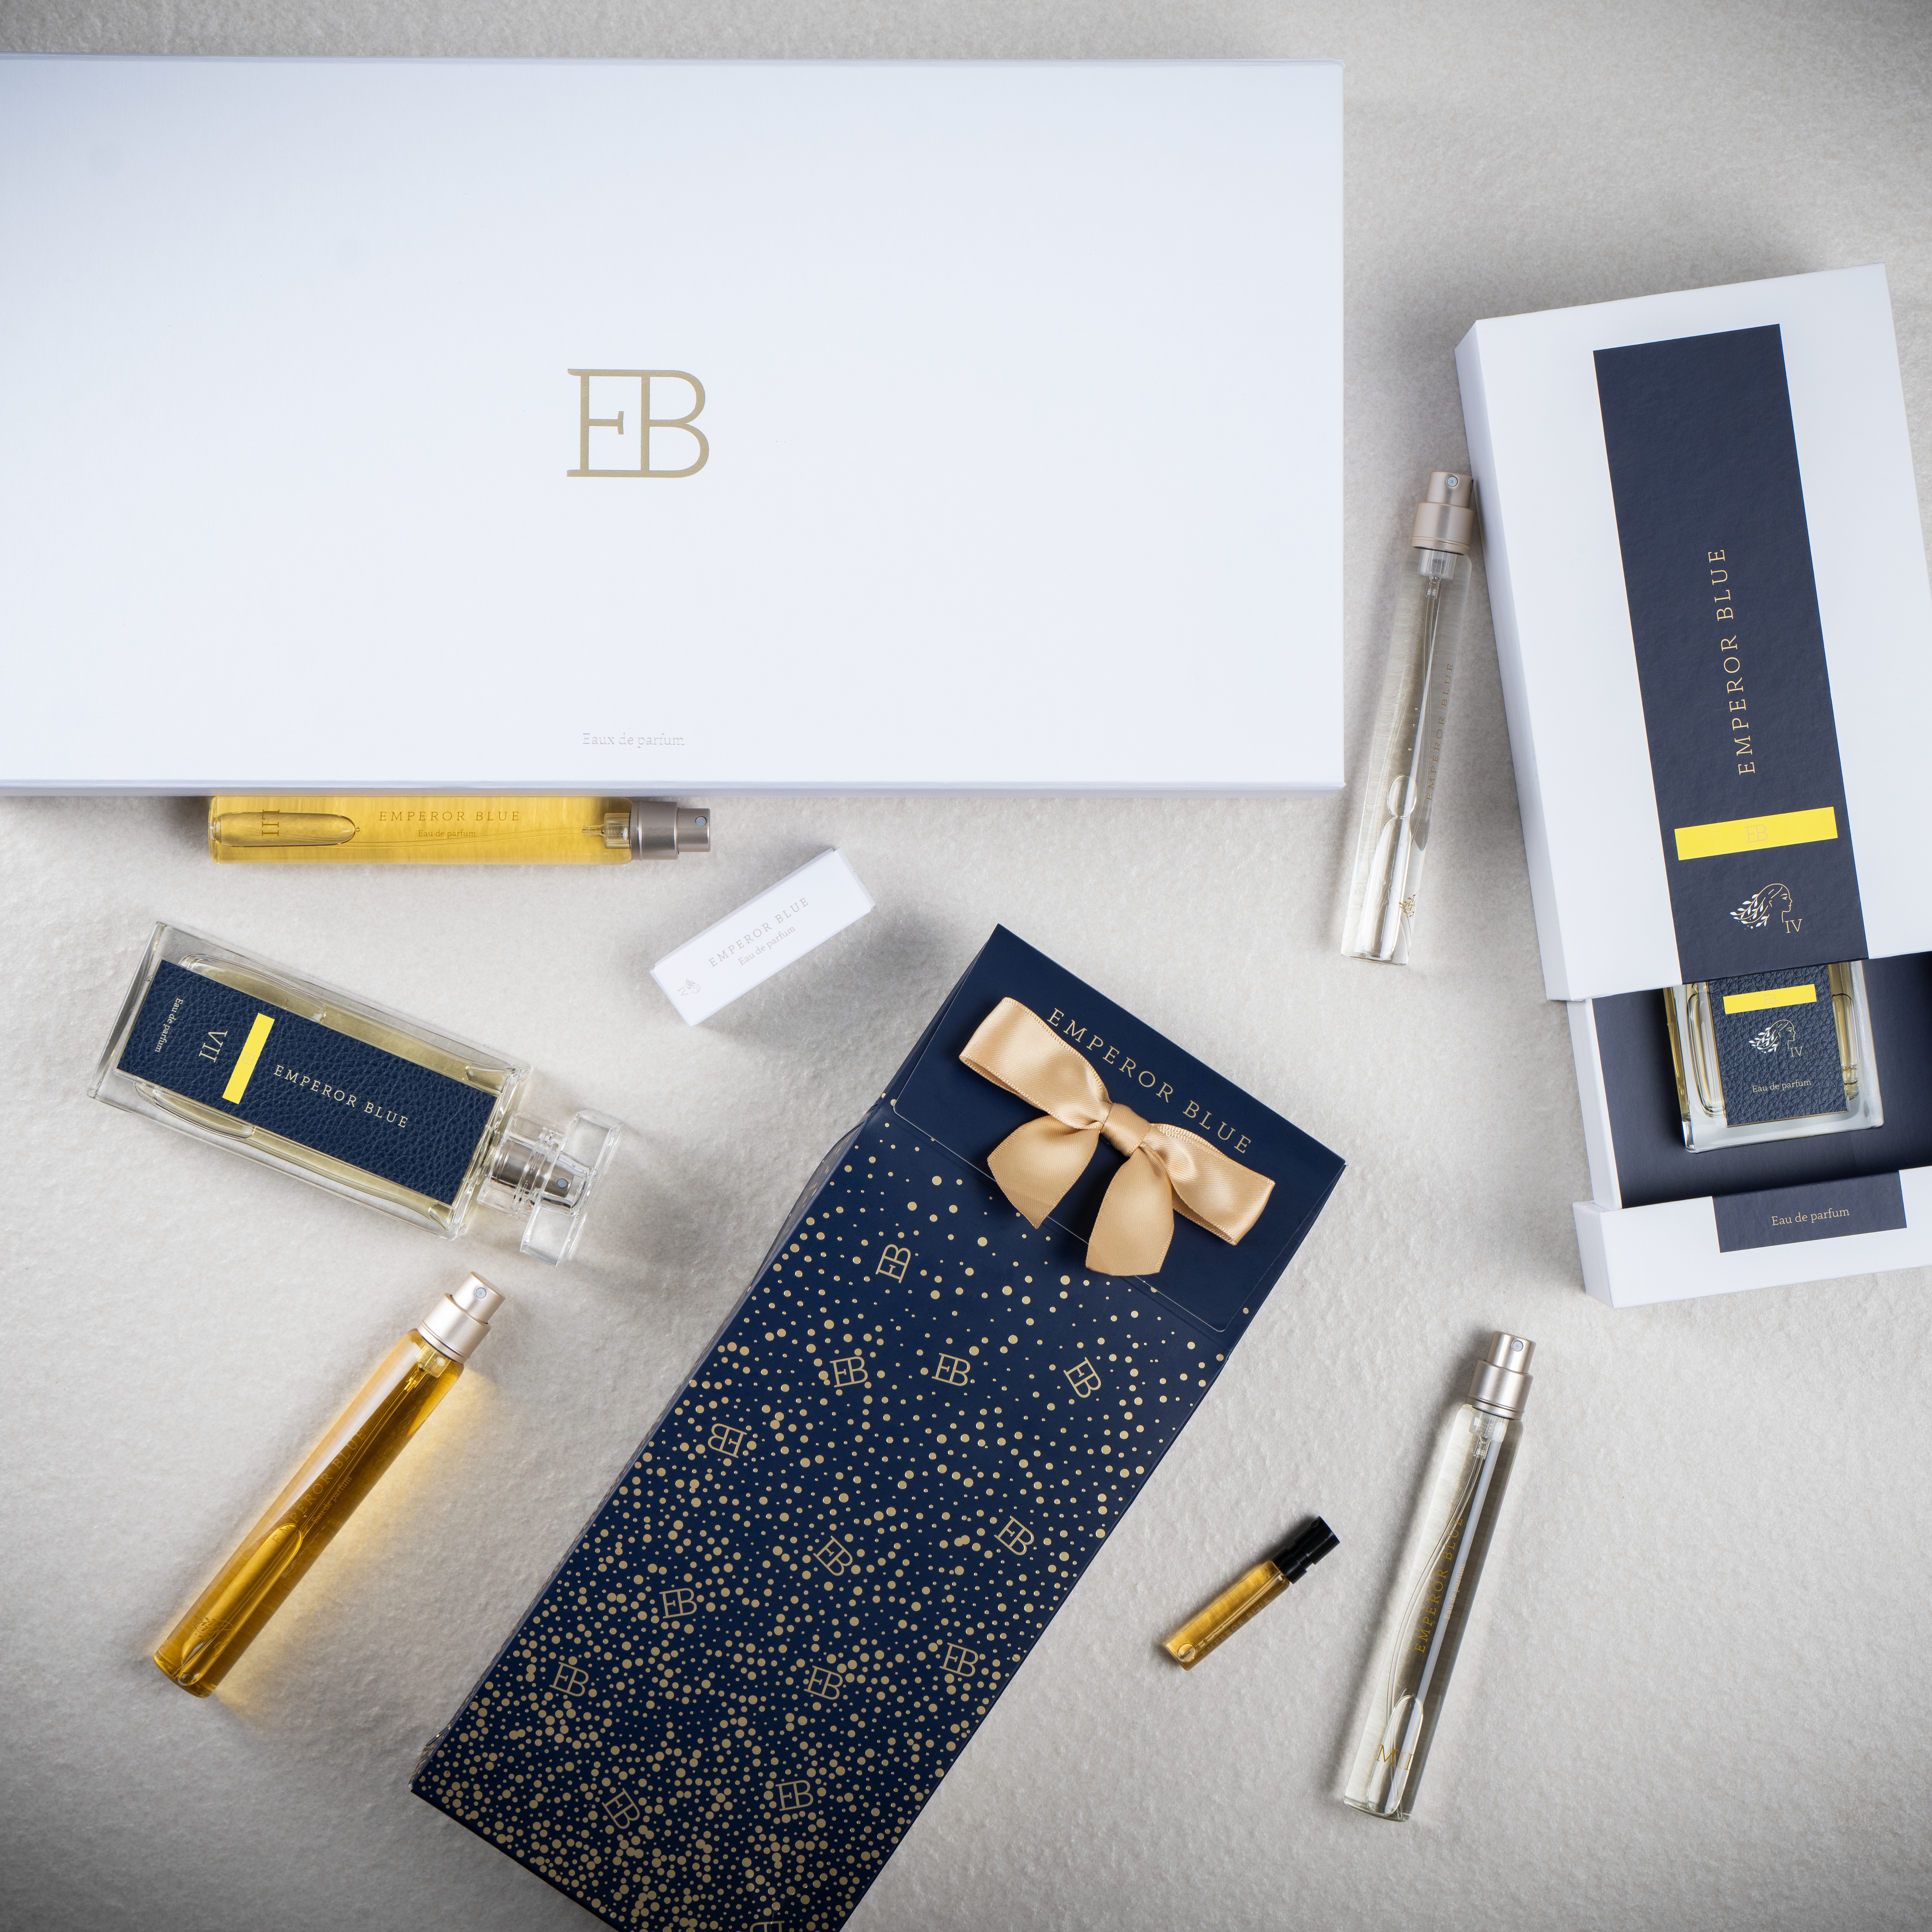 Emperor Blue Launches Their First-Ever Private Fragrance Collection